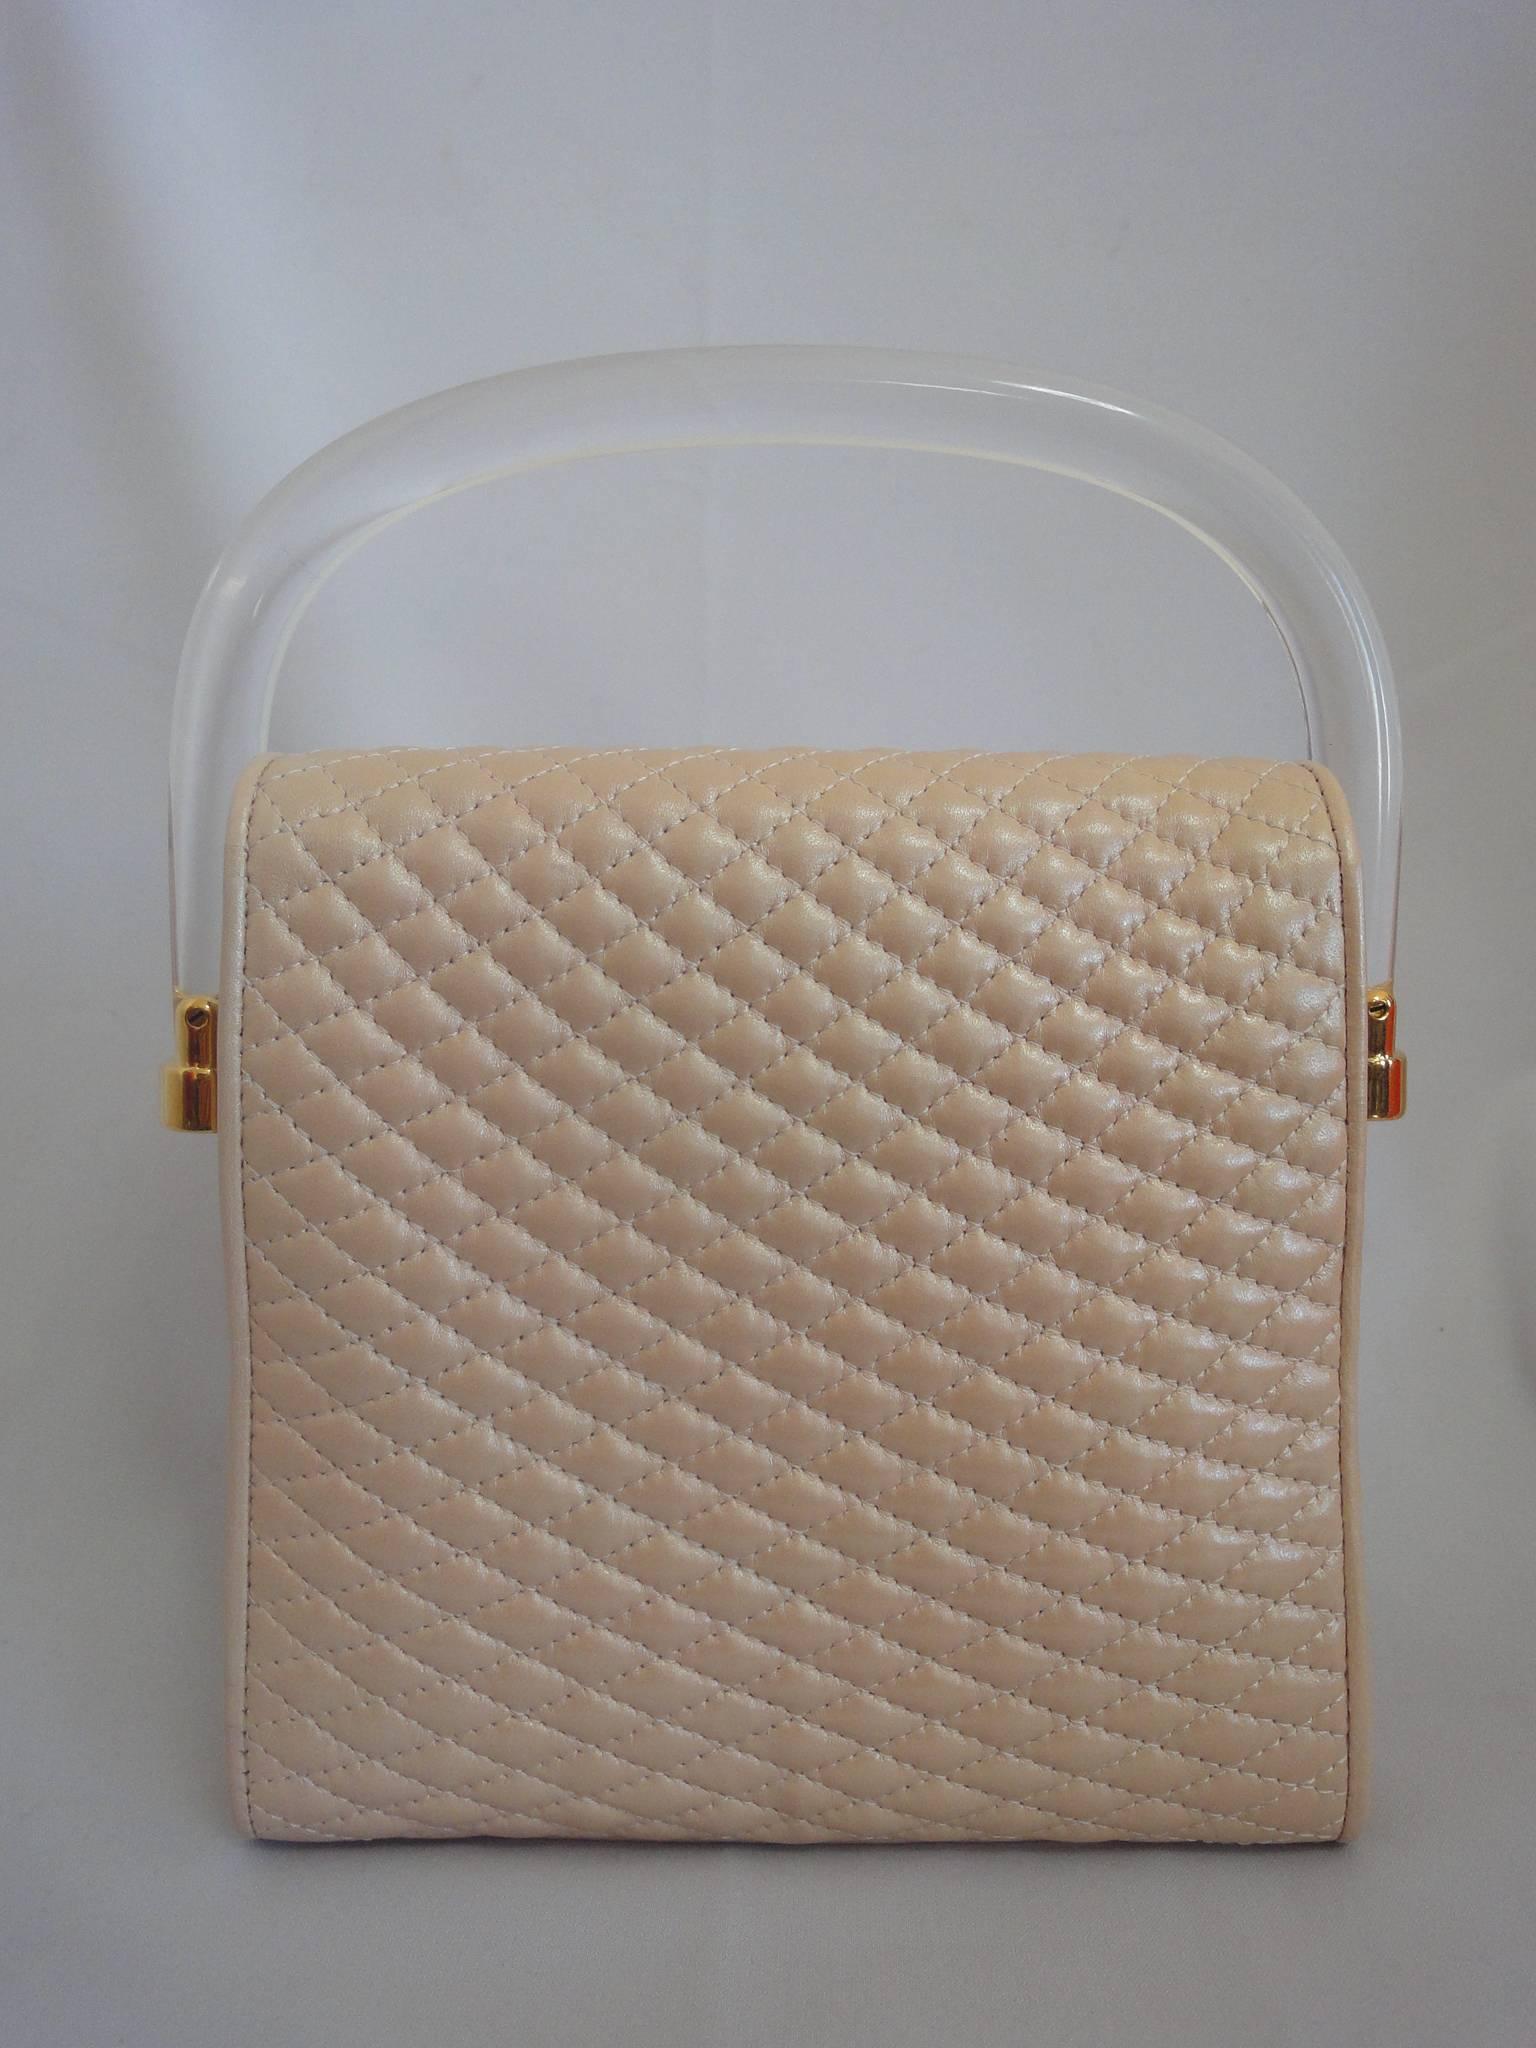 1990s. Vintage Bally pearl pink color lamb quilted leather purse with clear plastic handle with golden logo motif.  Can be shoulder bag.

MINT condition!
Introducing another adorable purse from BALLY back in the early to mid 90's.
Featuring clear